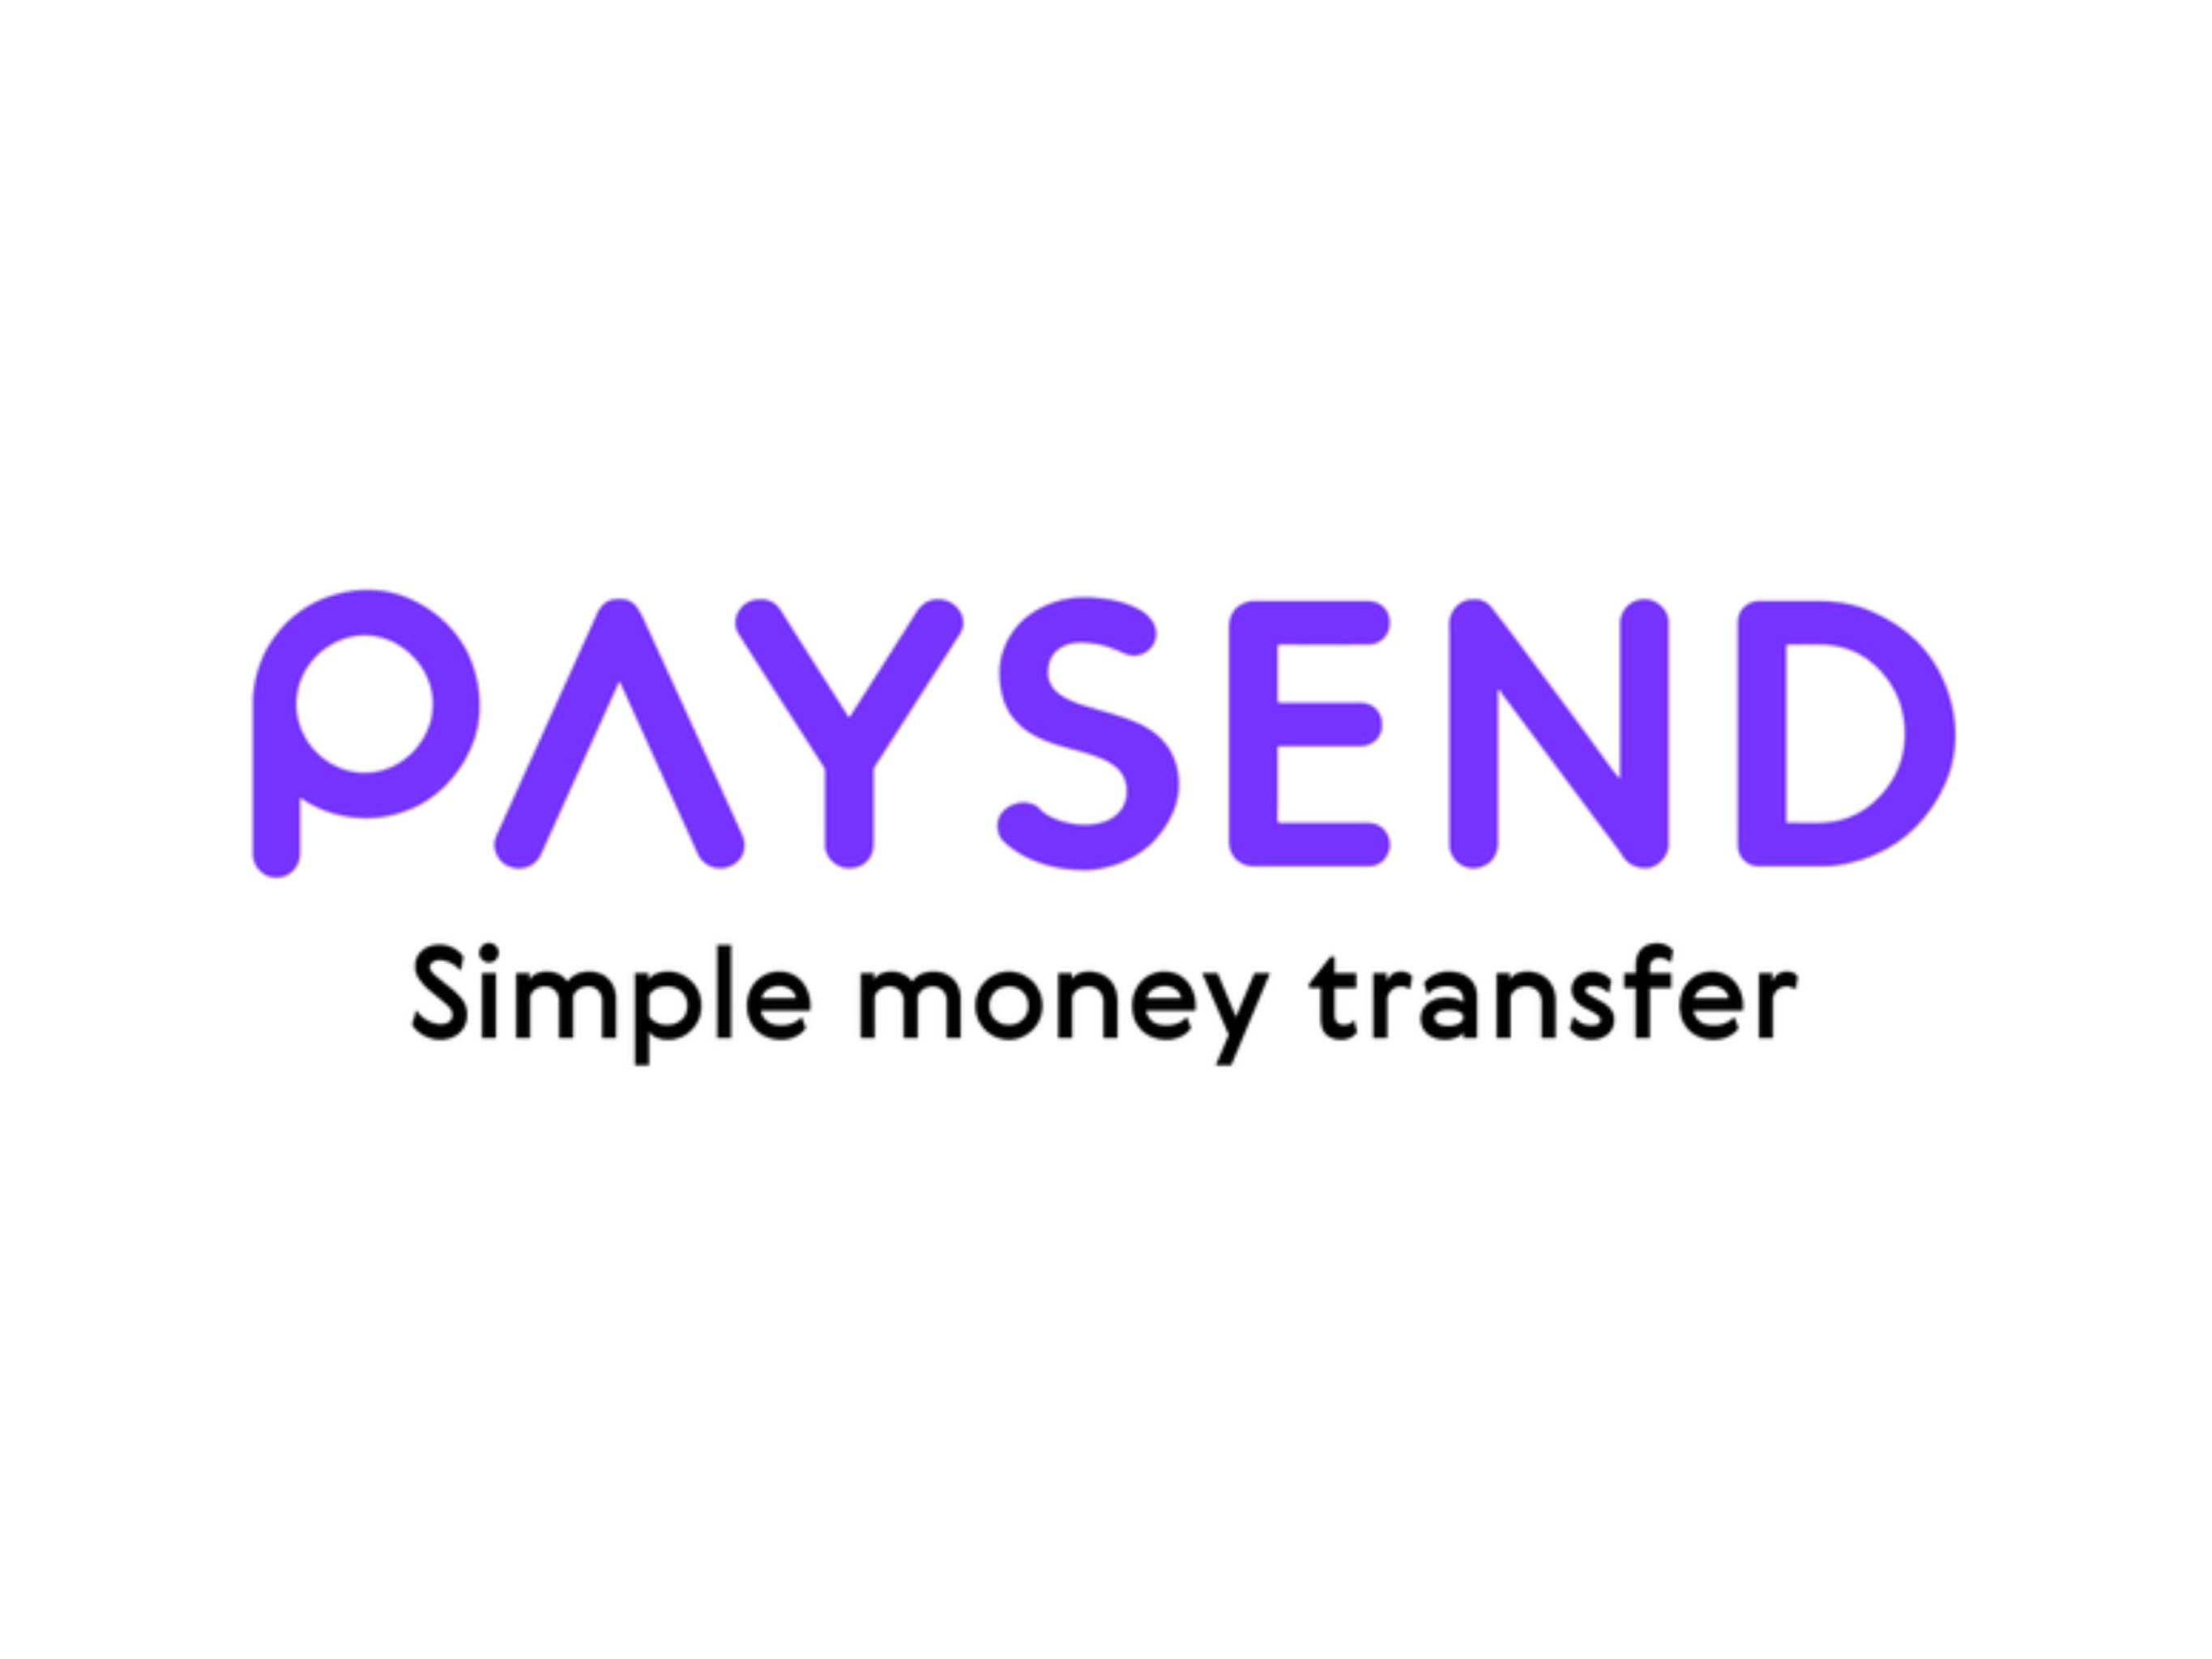 Welcome our newest Premium member Paysend